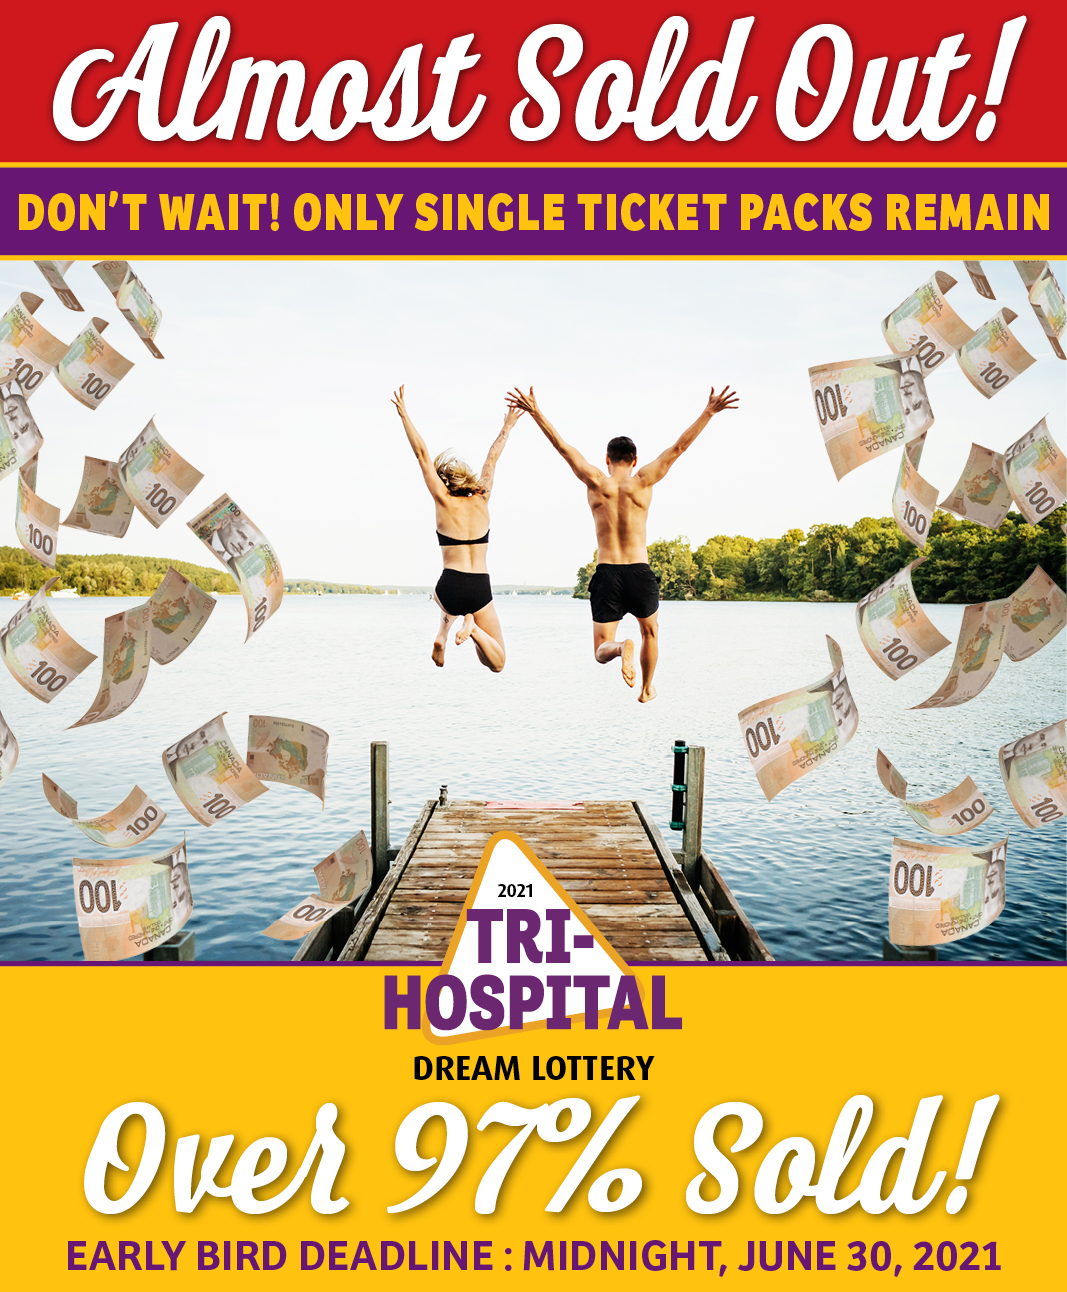 Hurry! TriHospital Dream Lottery Over 97 Sold The Home Lottery News™